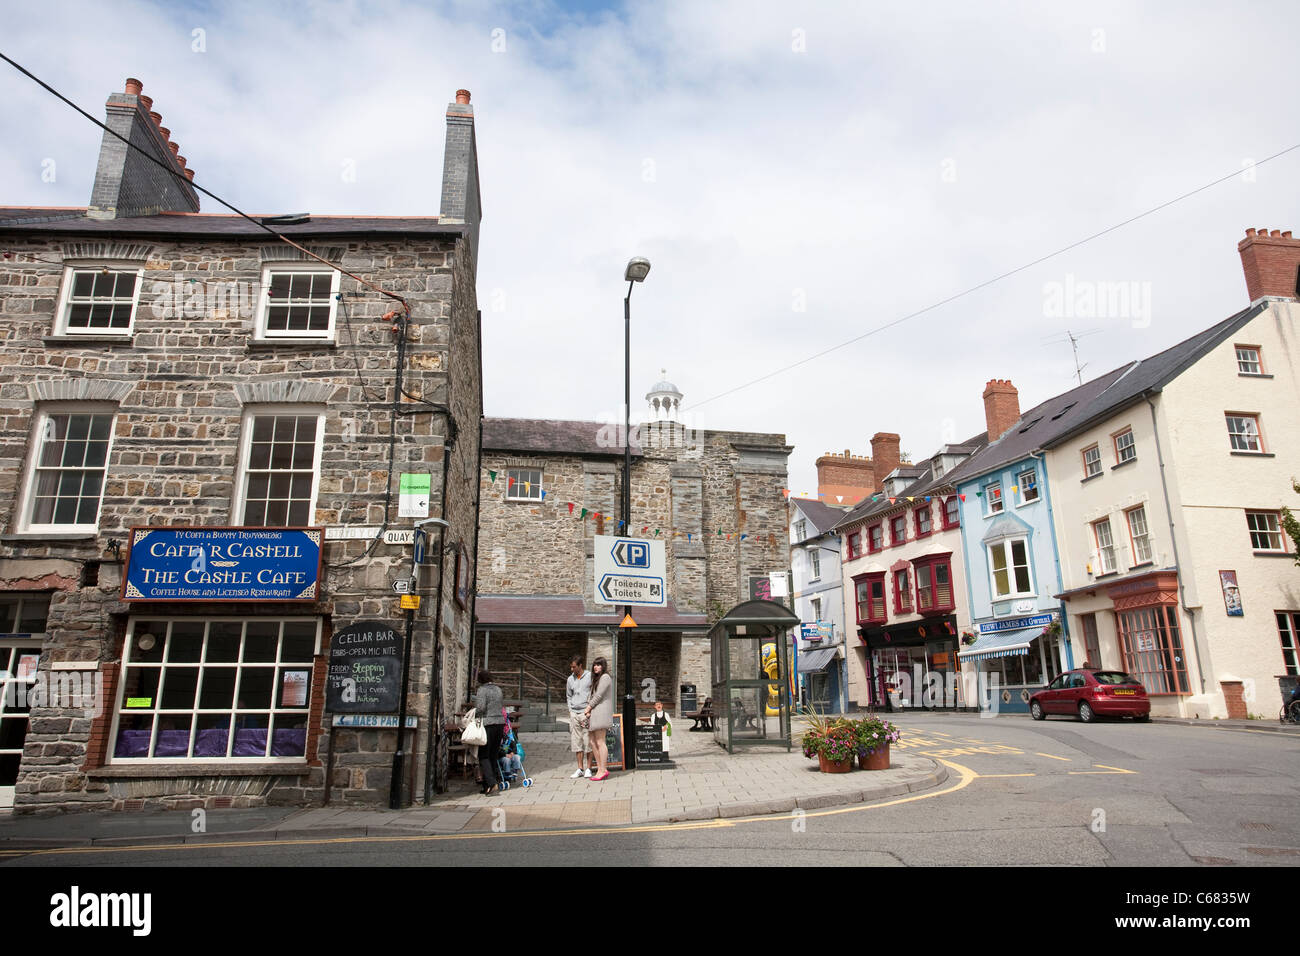 Cardigan High Street, West Wales. United Kingdom. Photo:Jeff Gilbert Banque D'Images